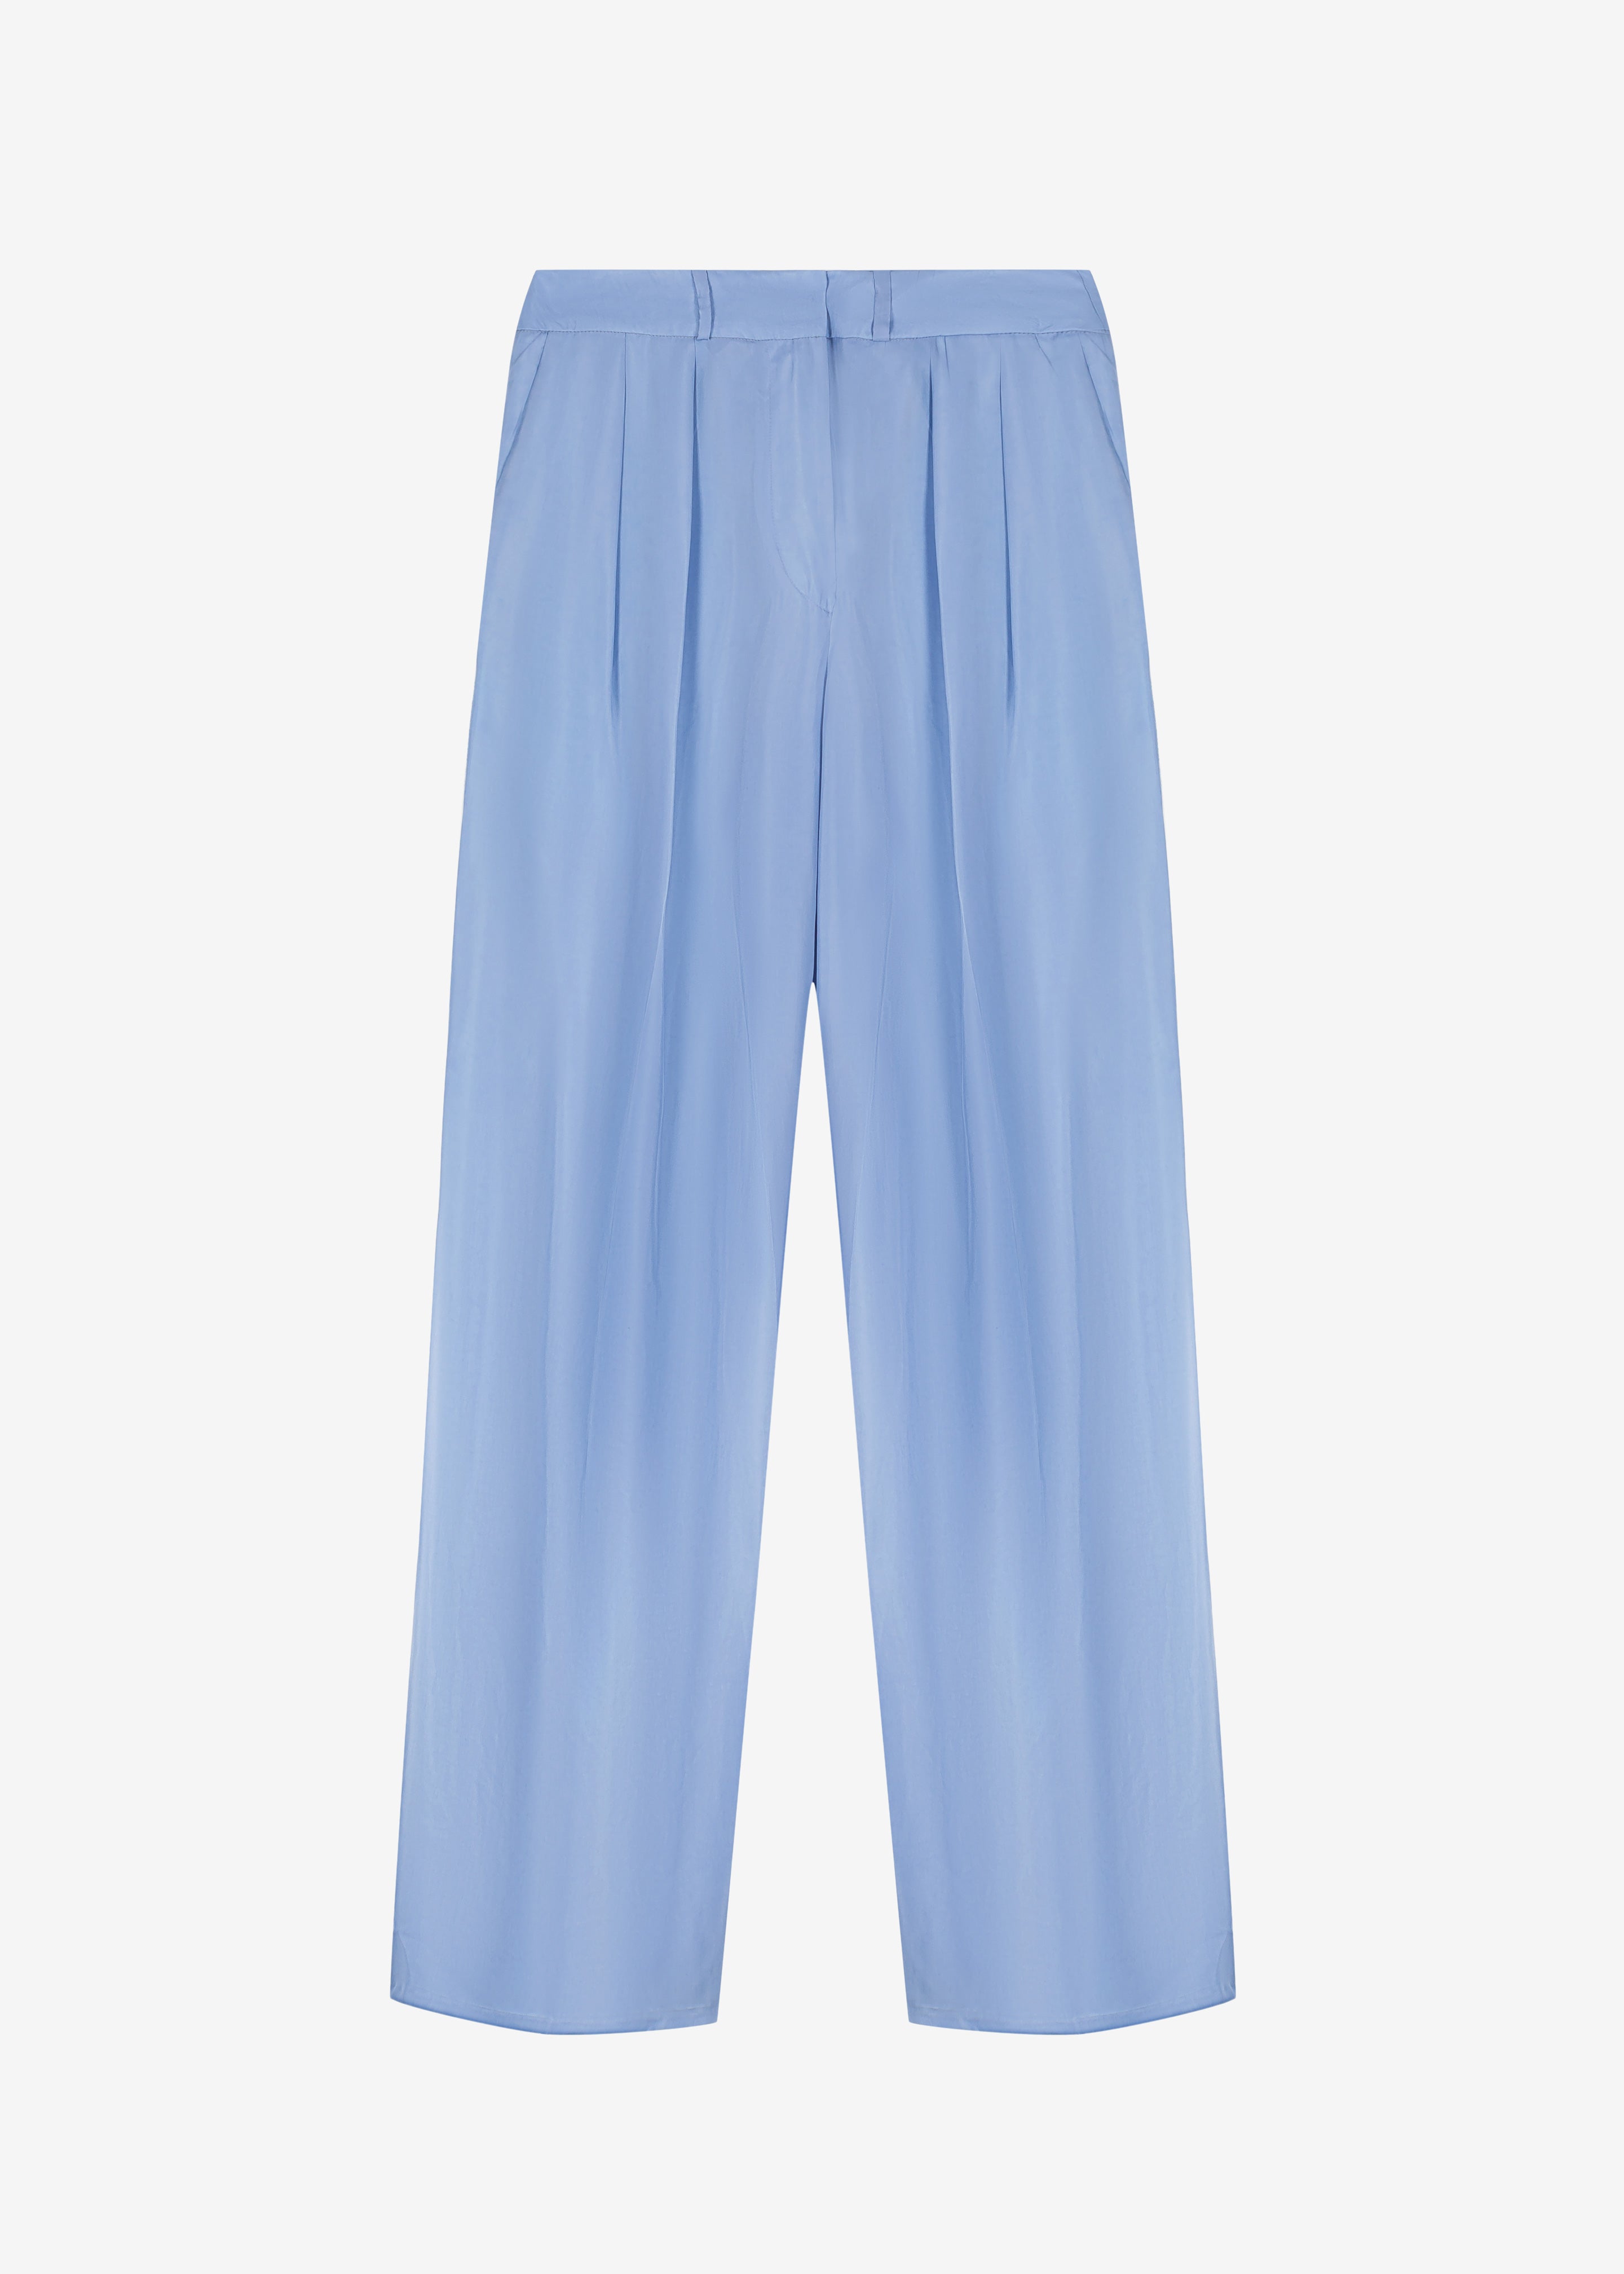 Tansy Silky Pleated Trousers - Light Blue - 9